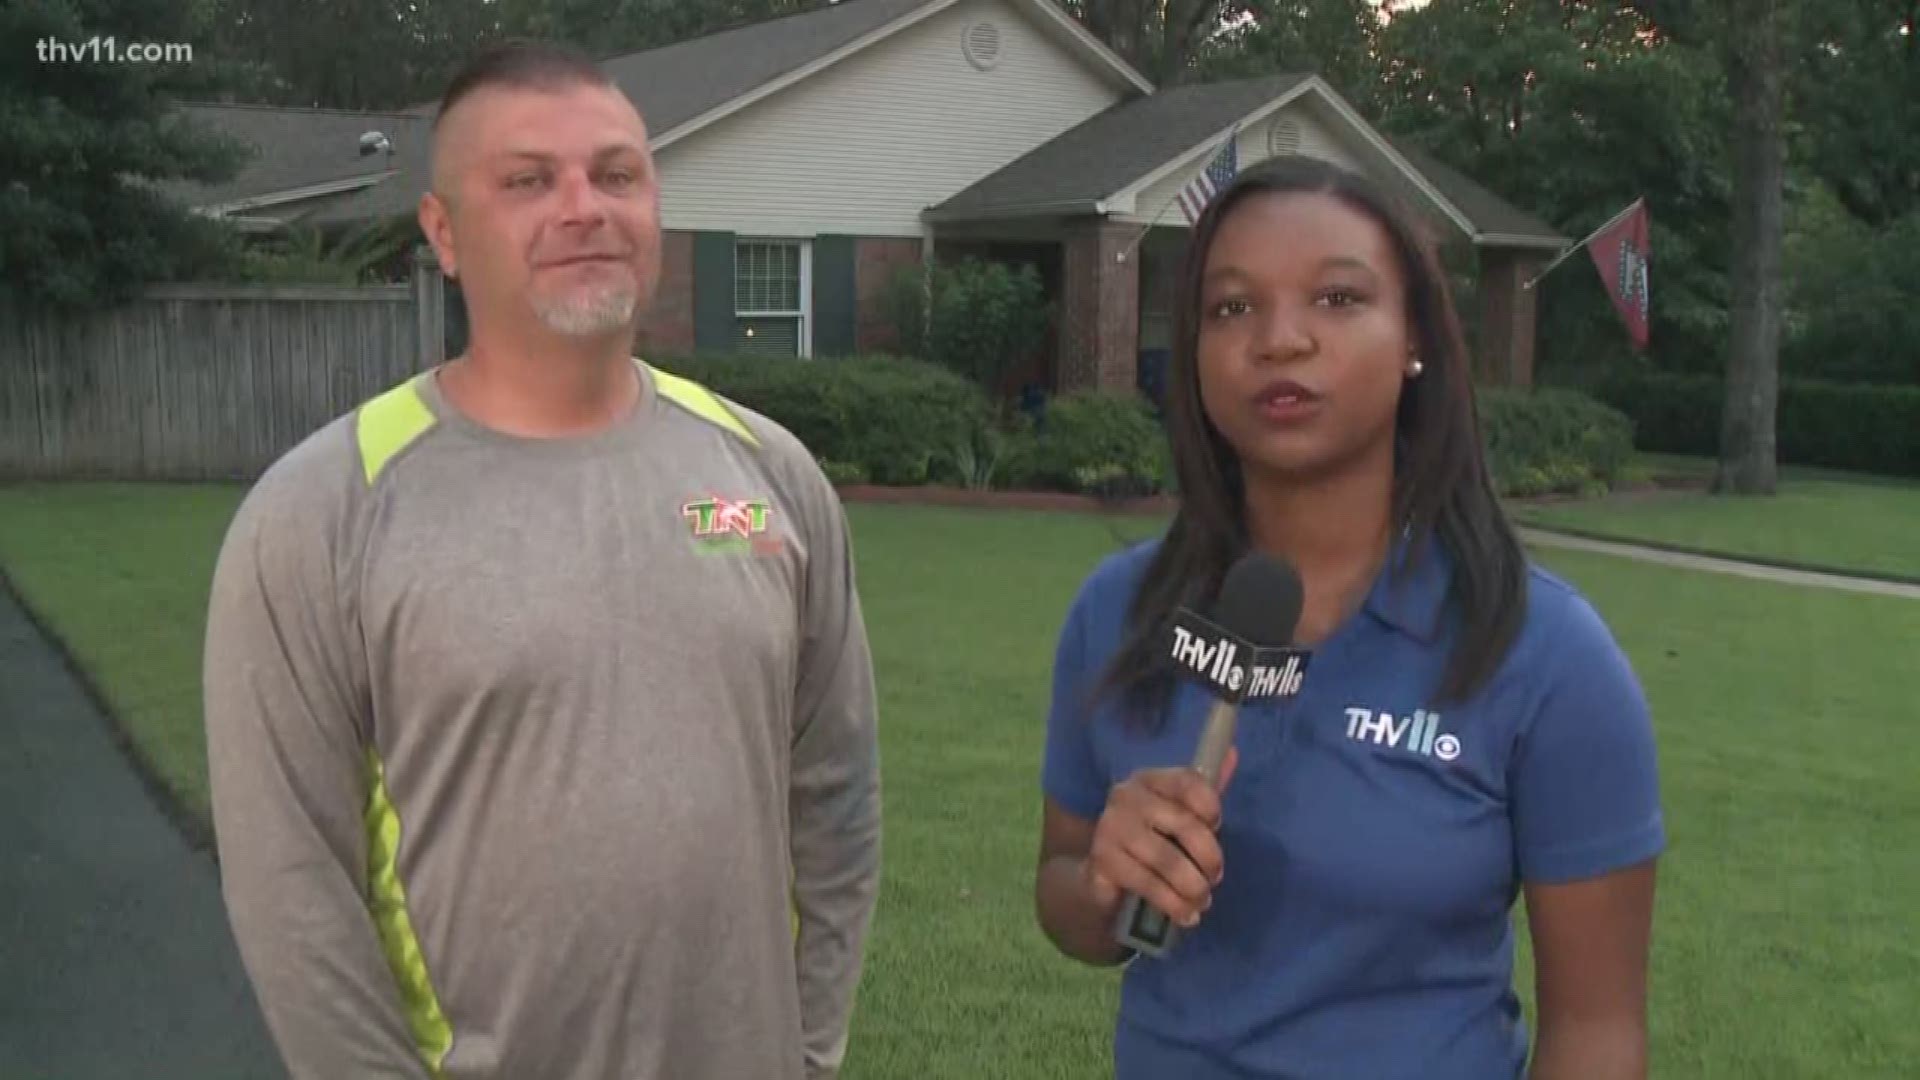 Just getting your lawn treated won't turn it into a "blanket." TNT Lawn Care gave us some tips to get that great lawn you want.